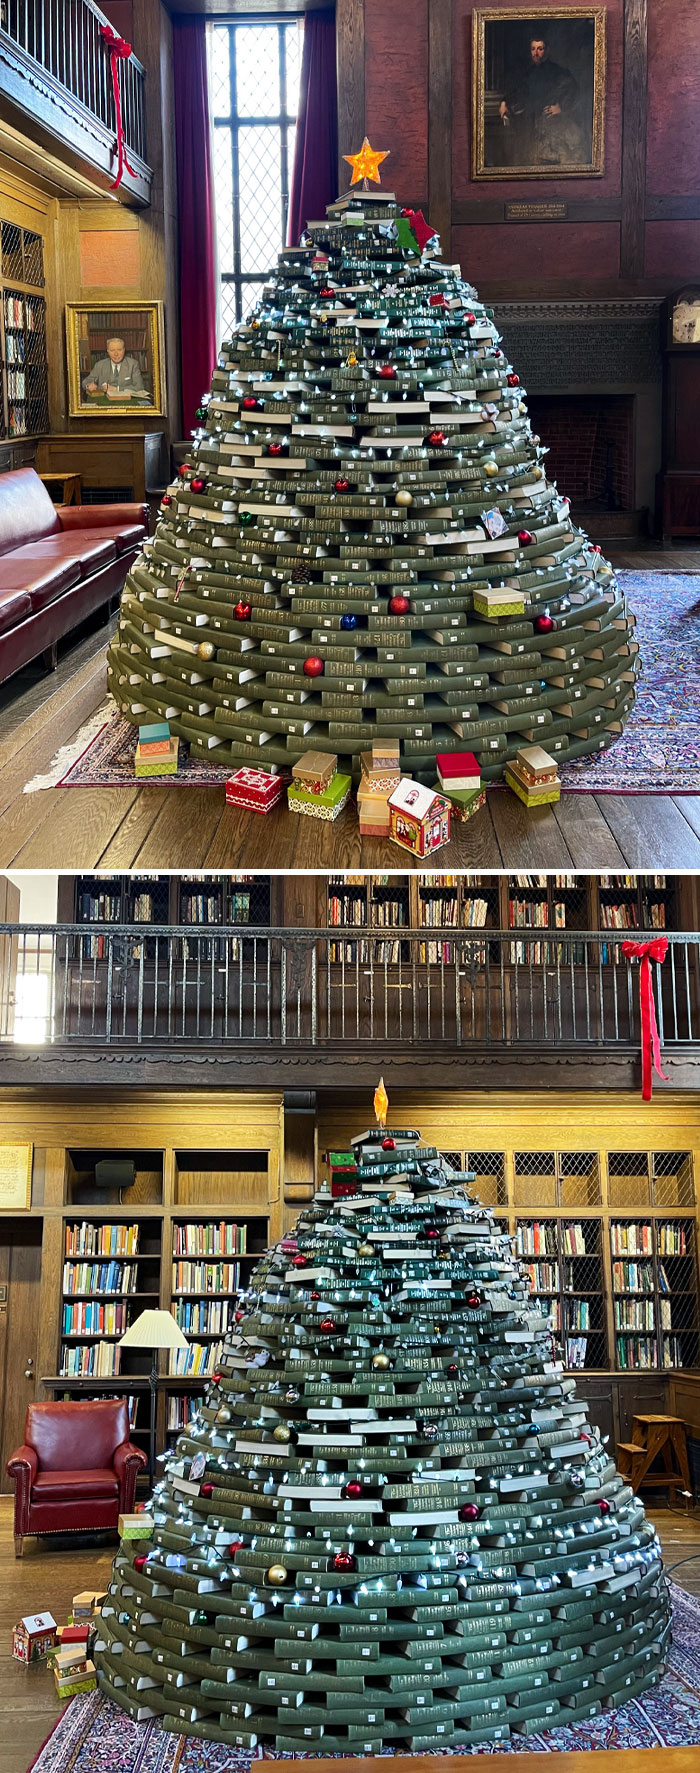 The Book Christmas Tree Is Here At The Yale Medical Library, Bringing All The Holiday Spirit Vibes